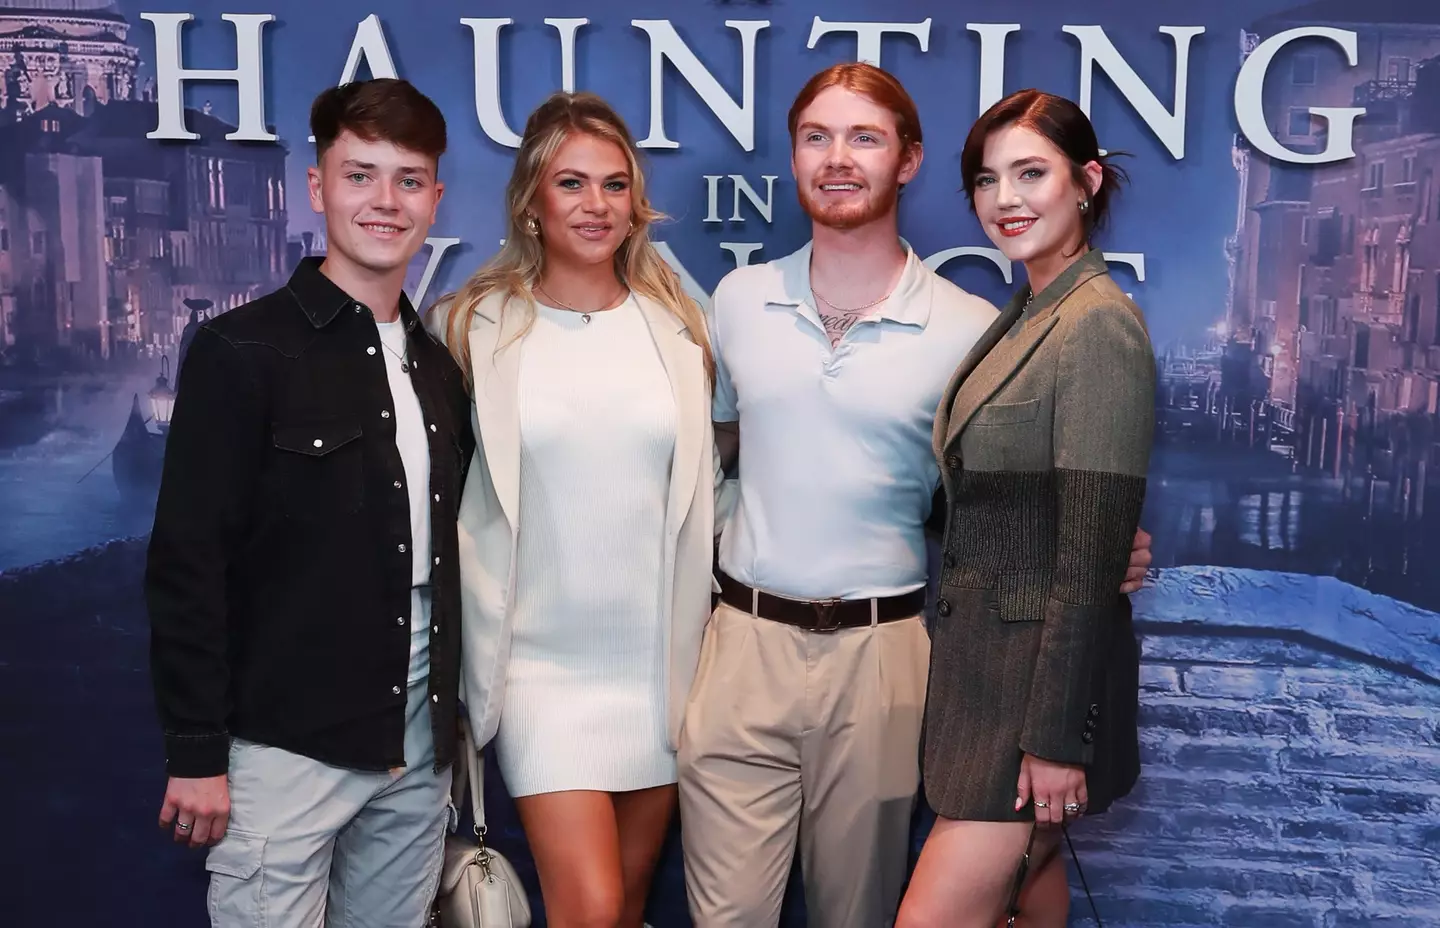 Jack was spotted with his new girlfriend Sophie (seen to his left) at a film premiere.